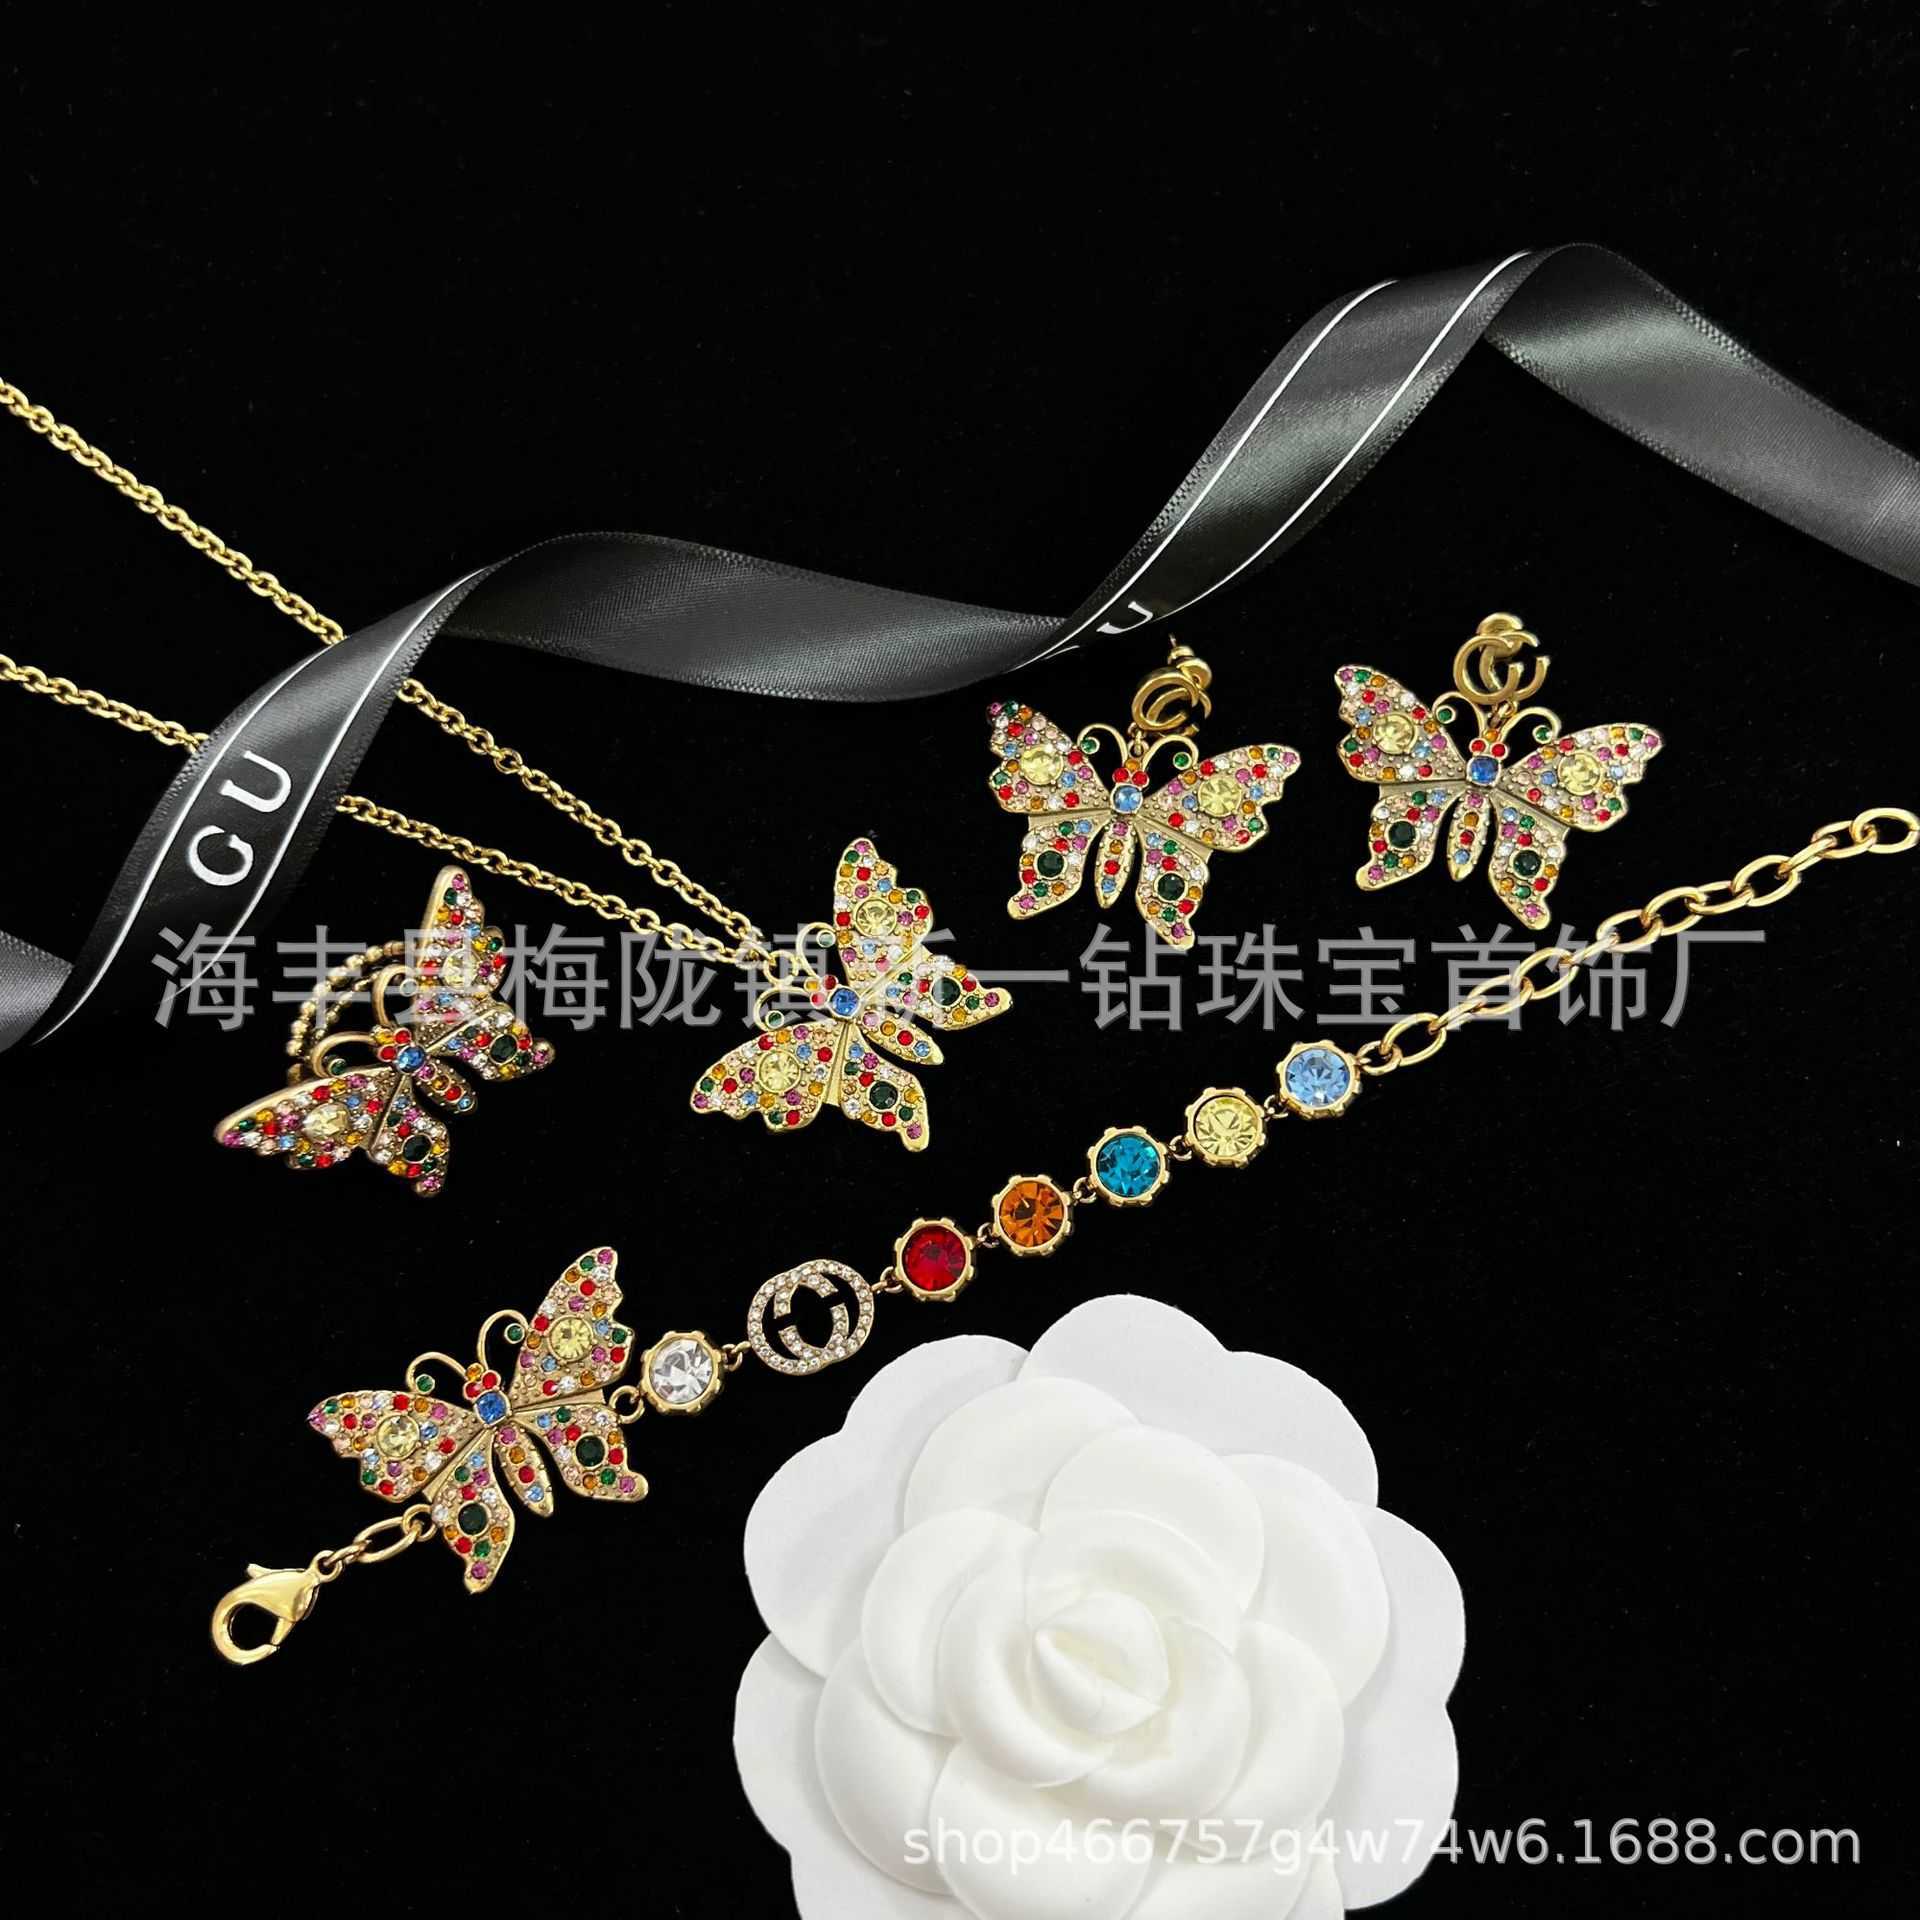 Design luxury jewelry temperament candy color necklace personality full diamond butterfly bracelet family earring ring